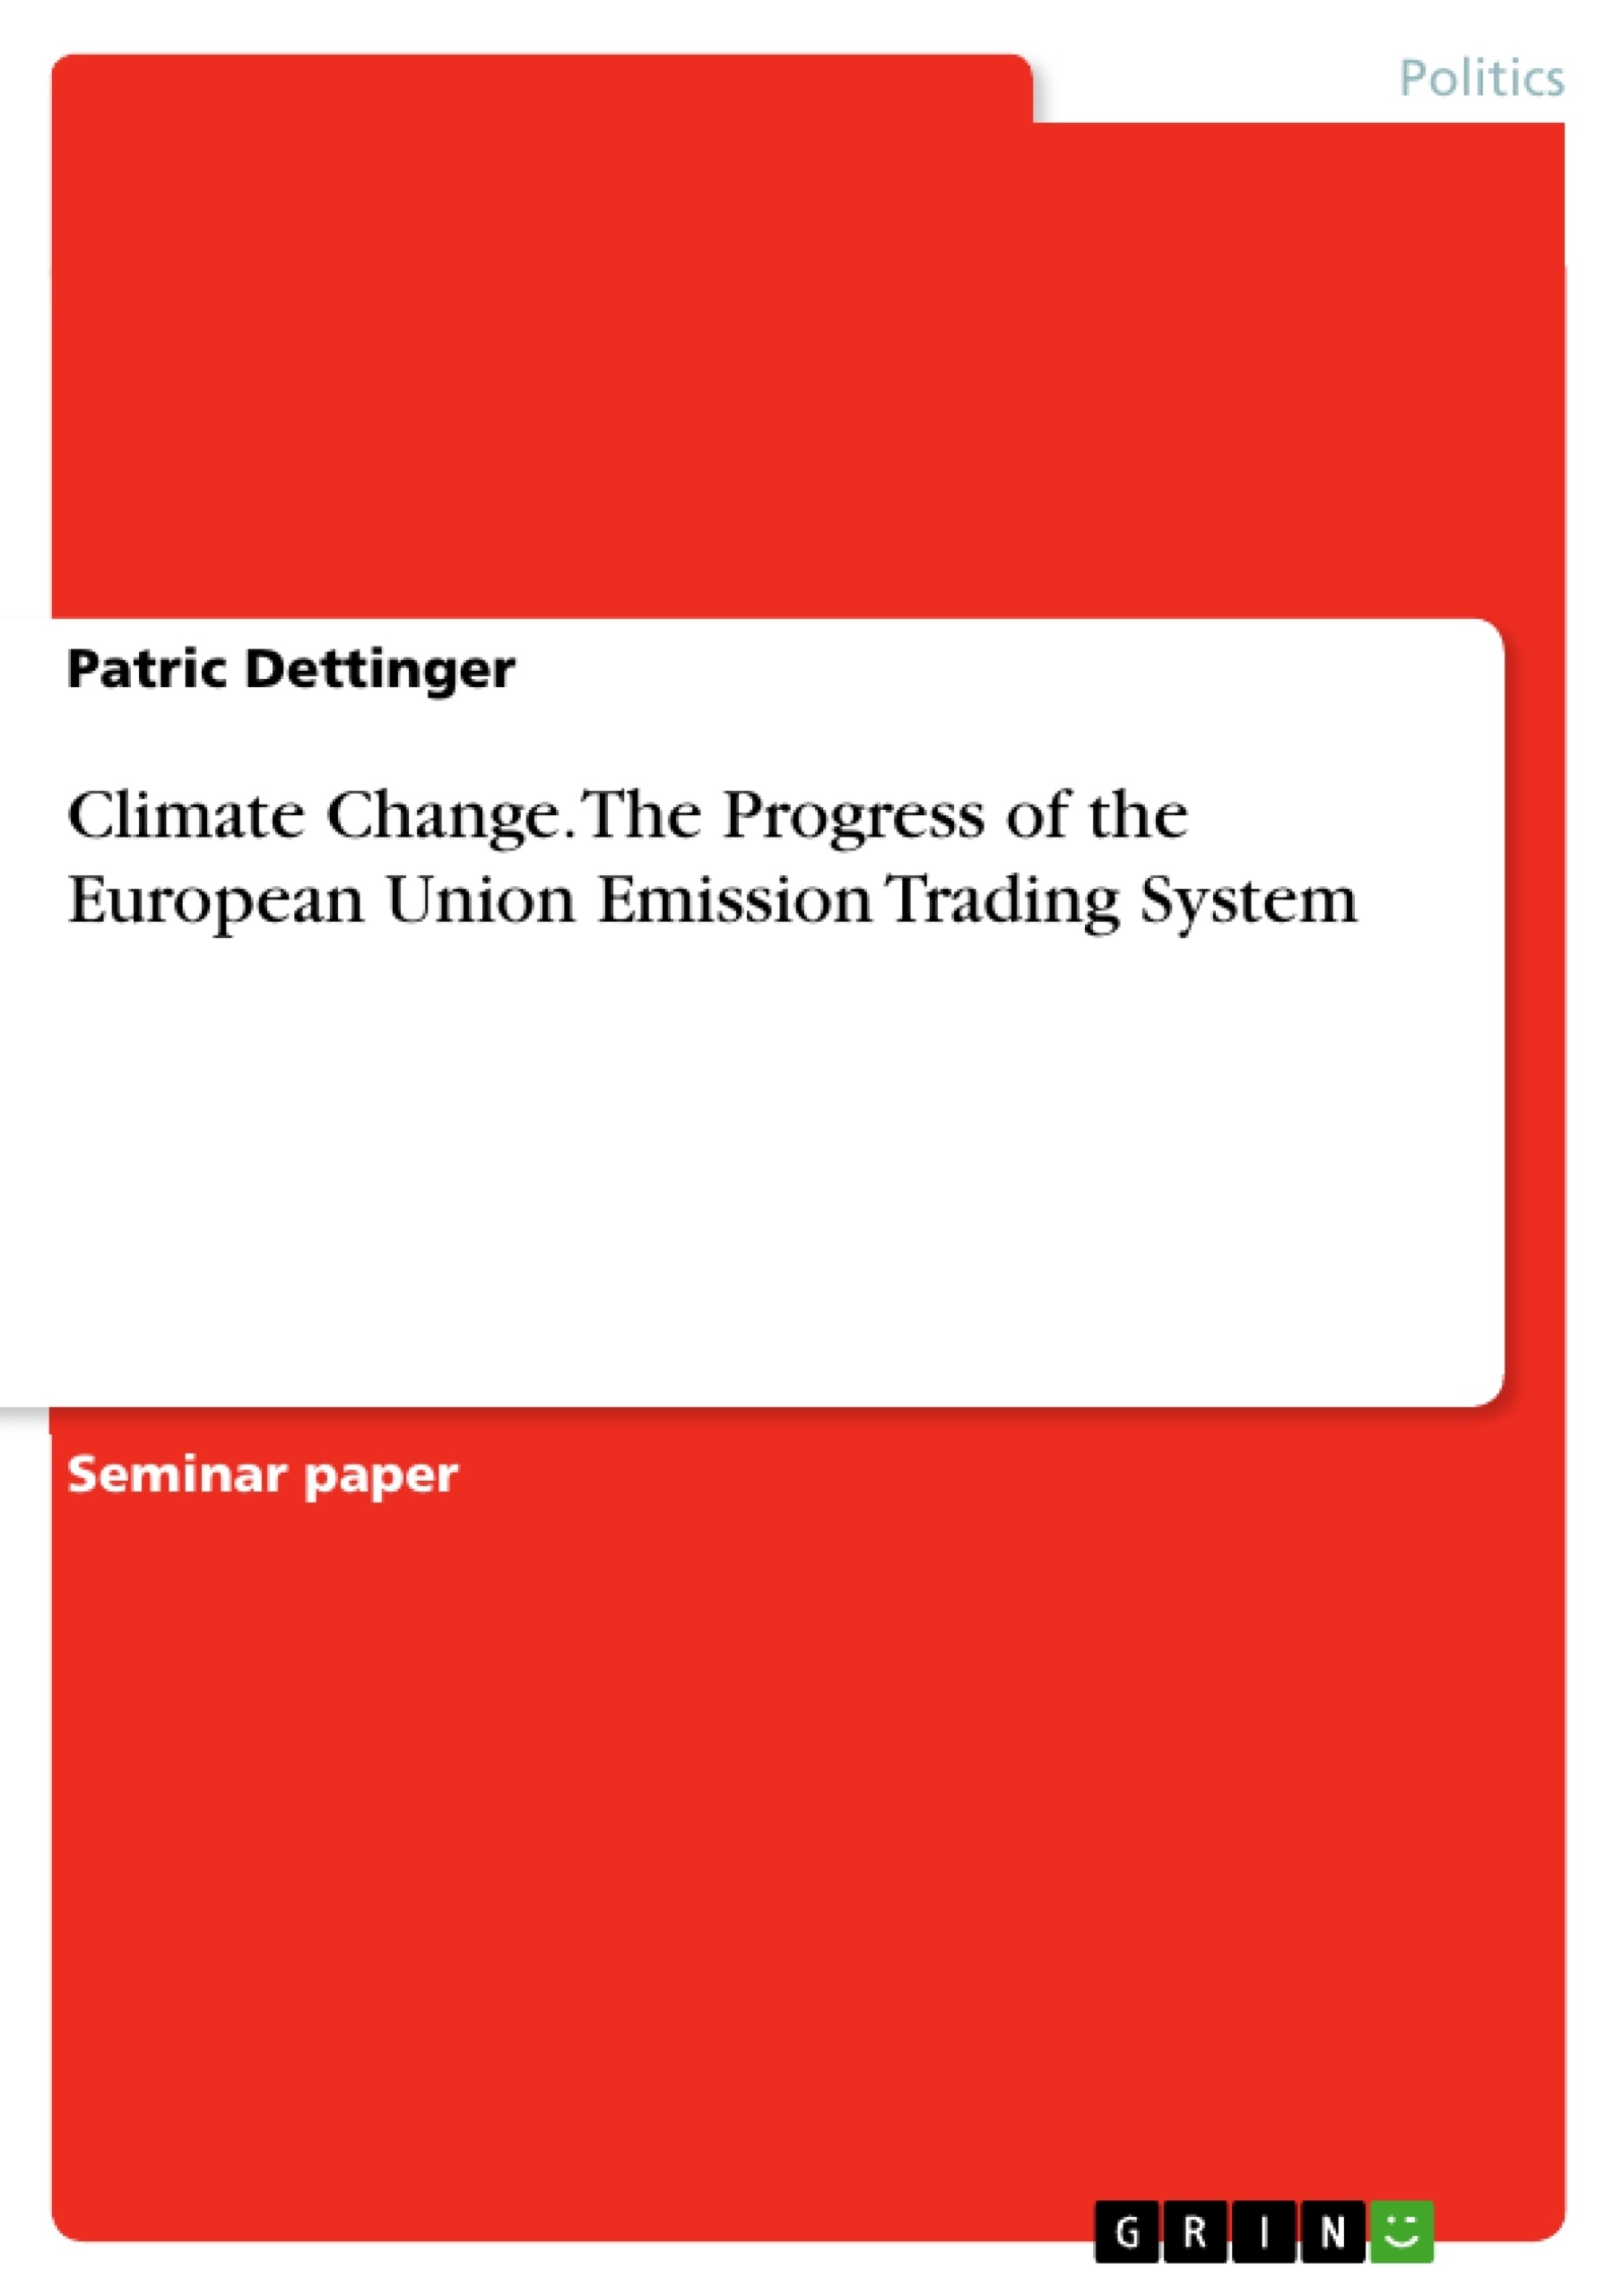 Title: Climate Change. The Progress of the European Union Emission Trading System